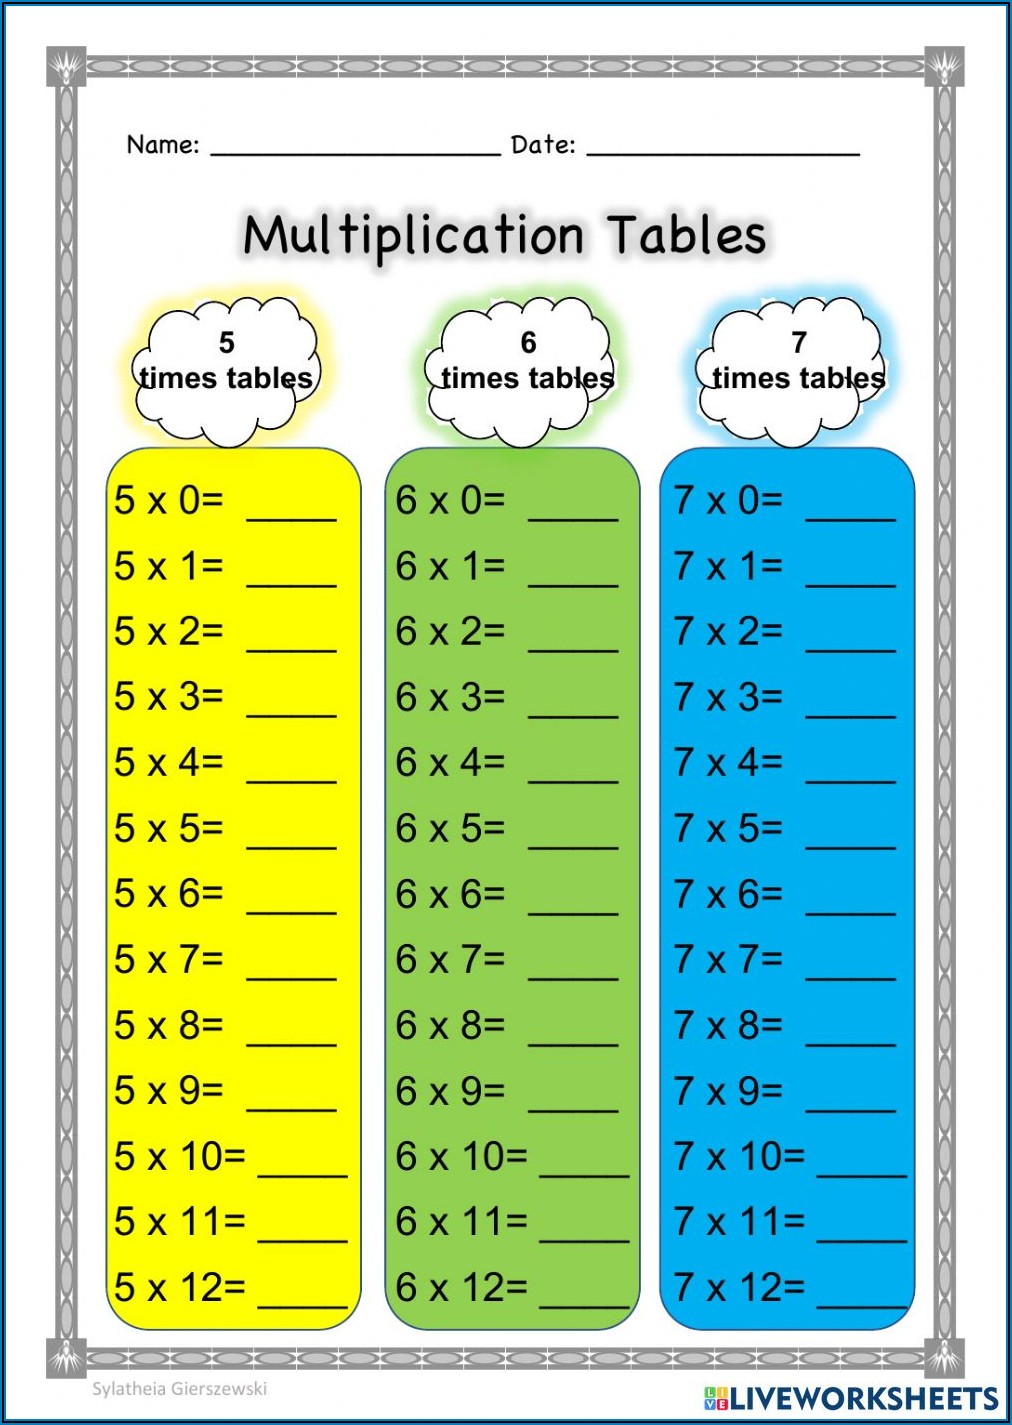 Worksheet For 7 Times Table